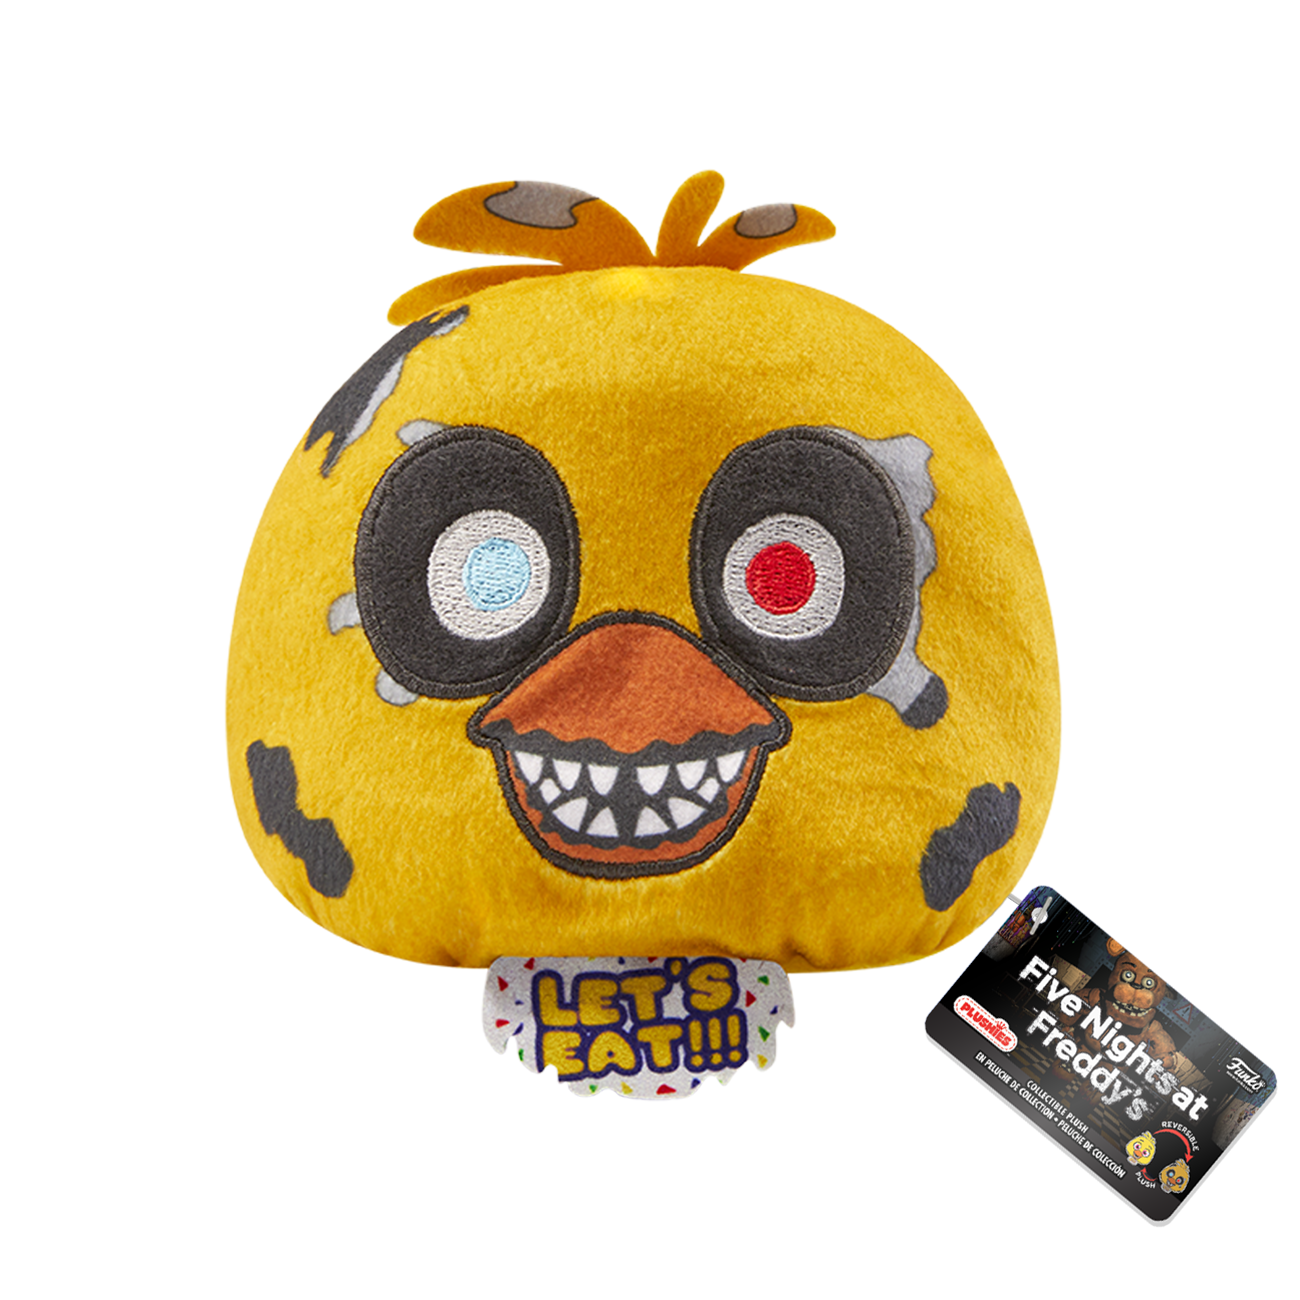 Funko Plush: Five Nights at Freddy's (FNAF) Reversible Heads - 4